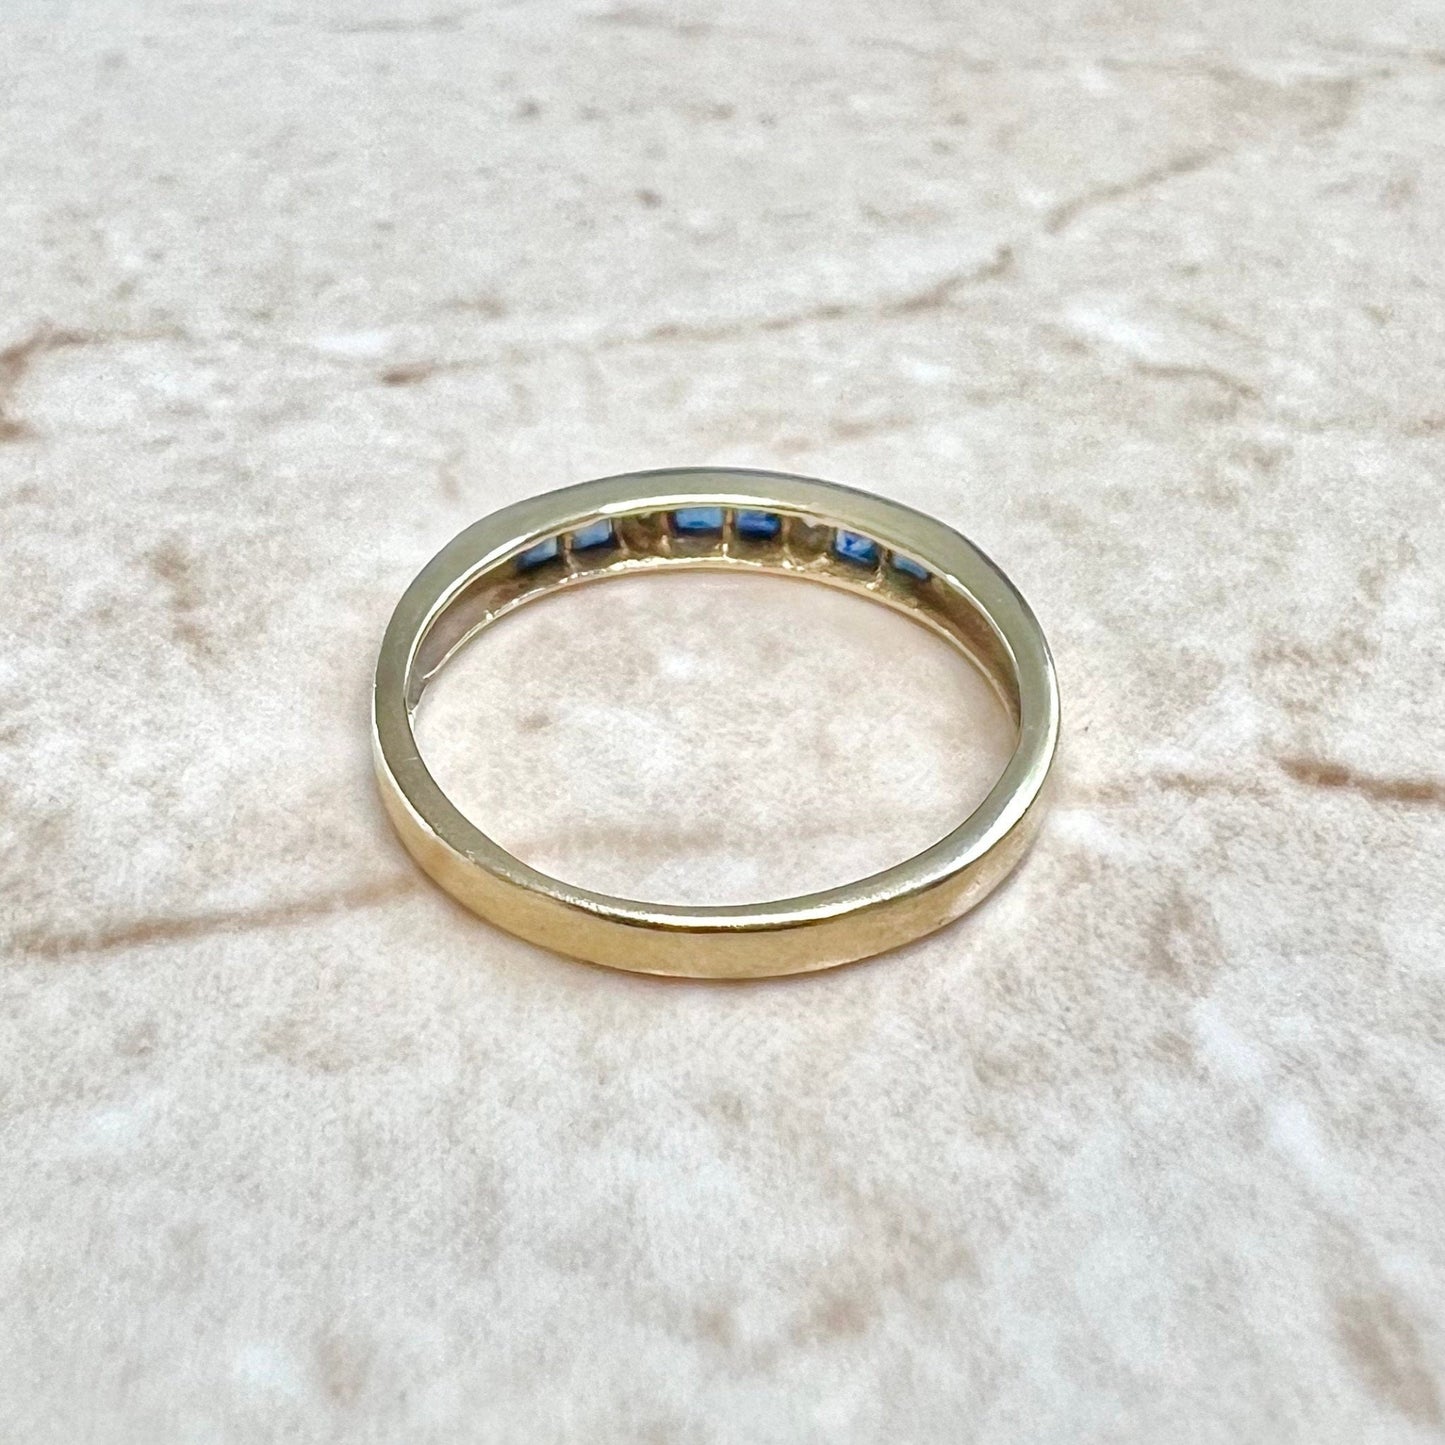 Vintage 14K Diamond & Sapphire Band Ring - Yellow Gold Blue Sapphire Ring - September Birthstone Ring - Anniversary Ring - Gifts For Her